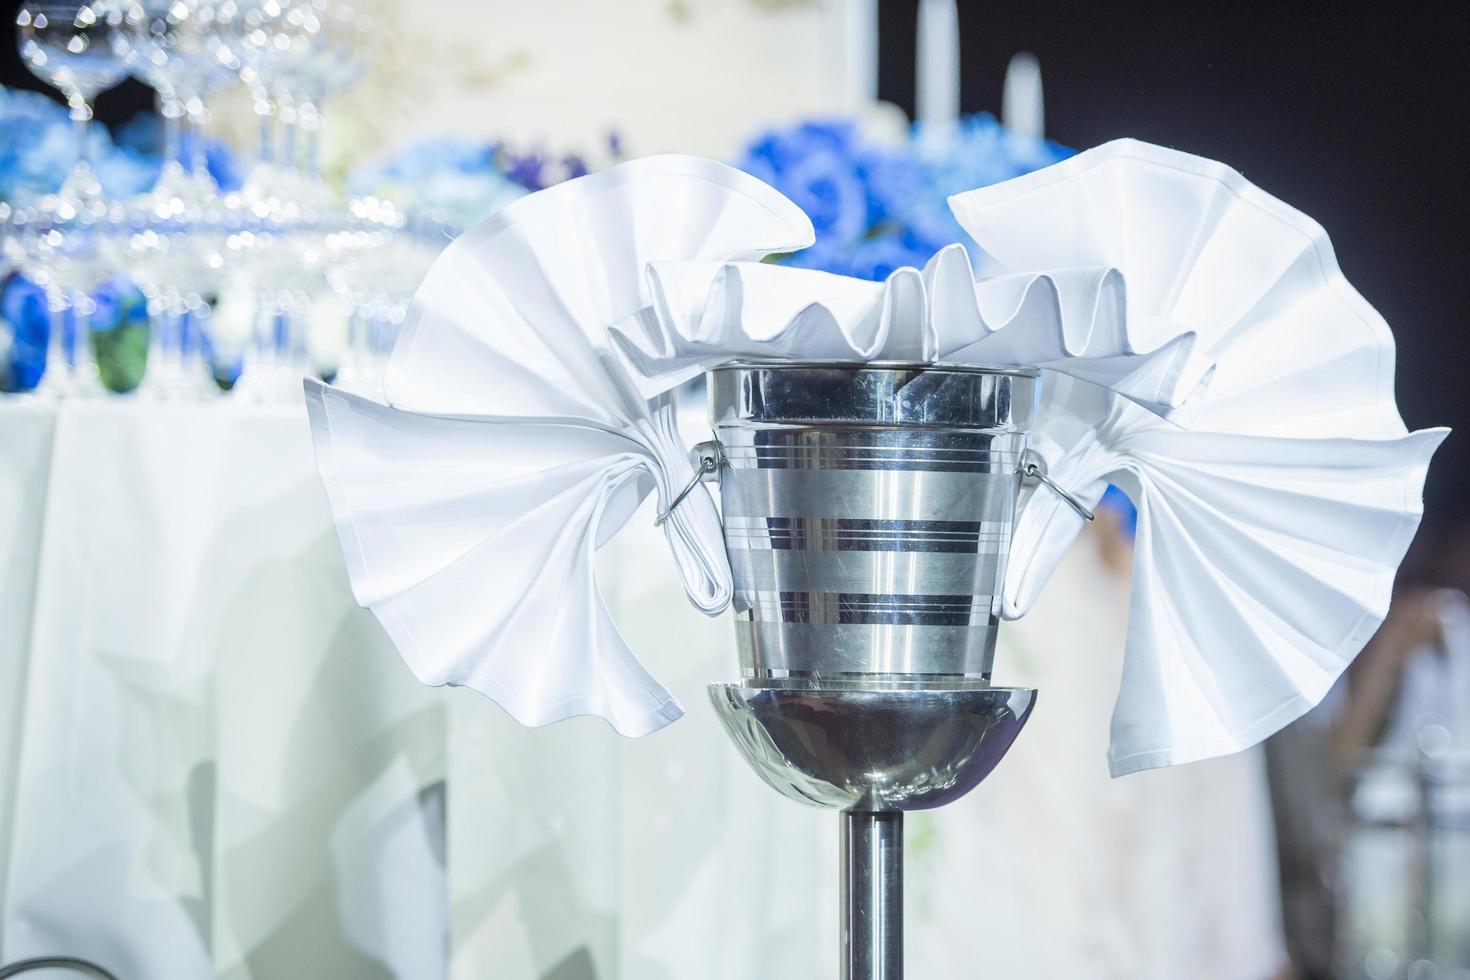 Rows of champagne glasses in wedding party photo